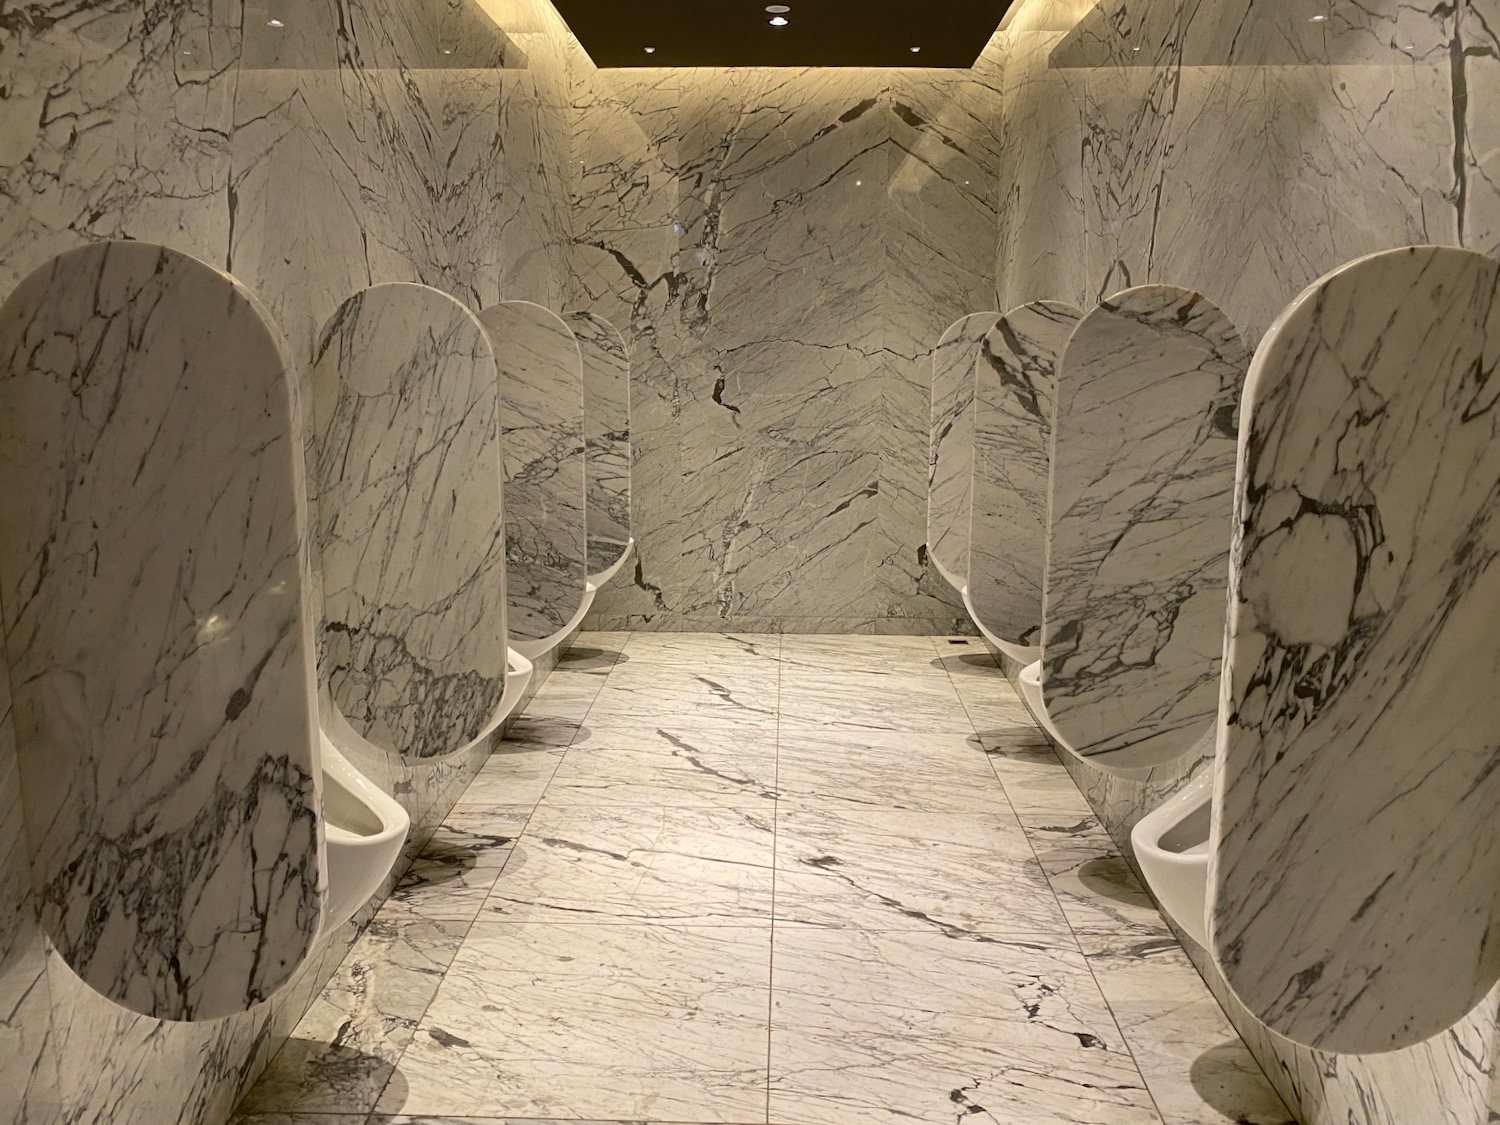 a bathroom with marble walls and urinals